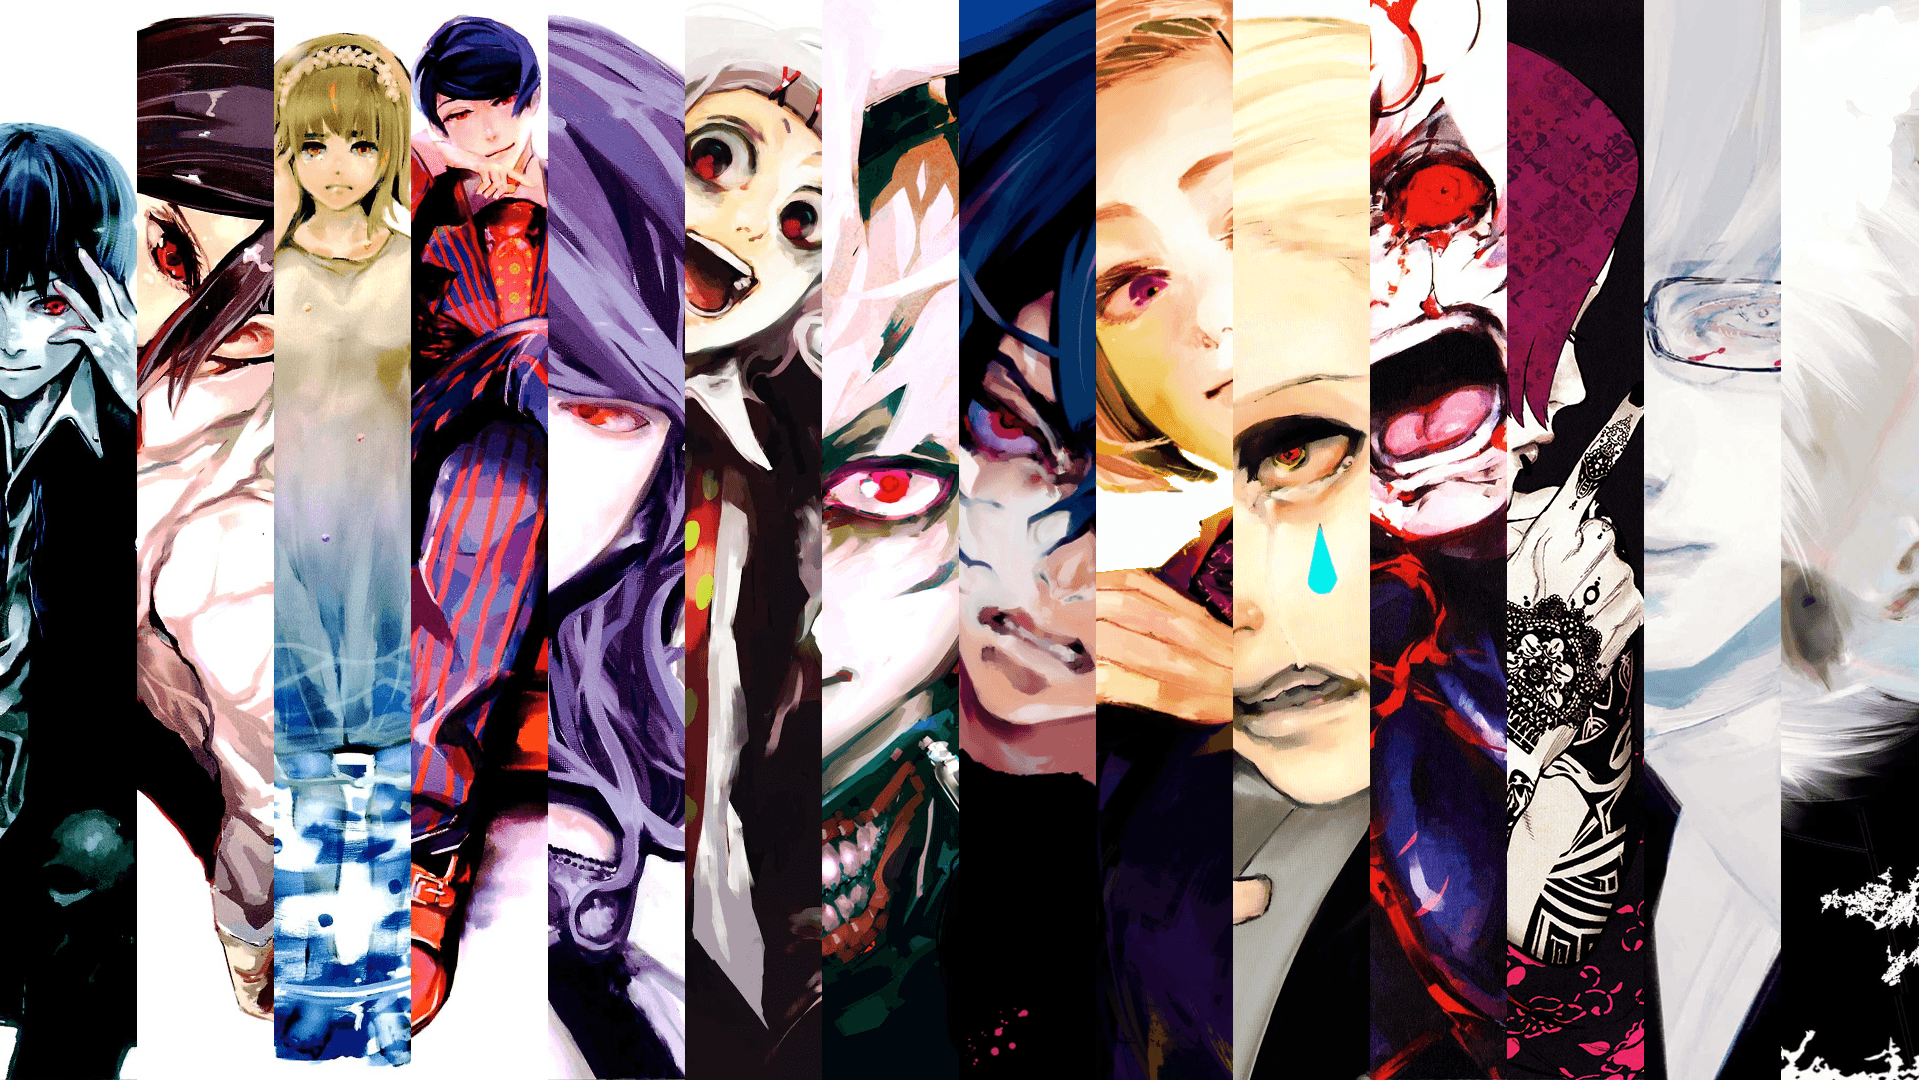 All Tokyo Ghoul Volume Covers Wallpapers 1920x1080 : TokyoGhoul.